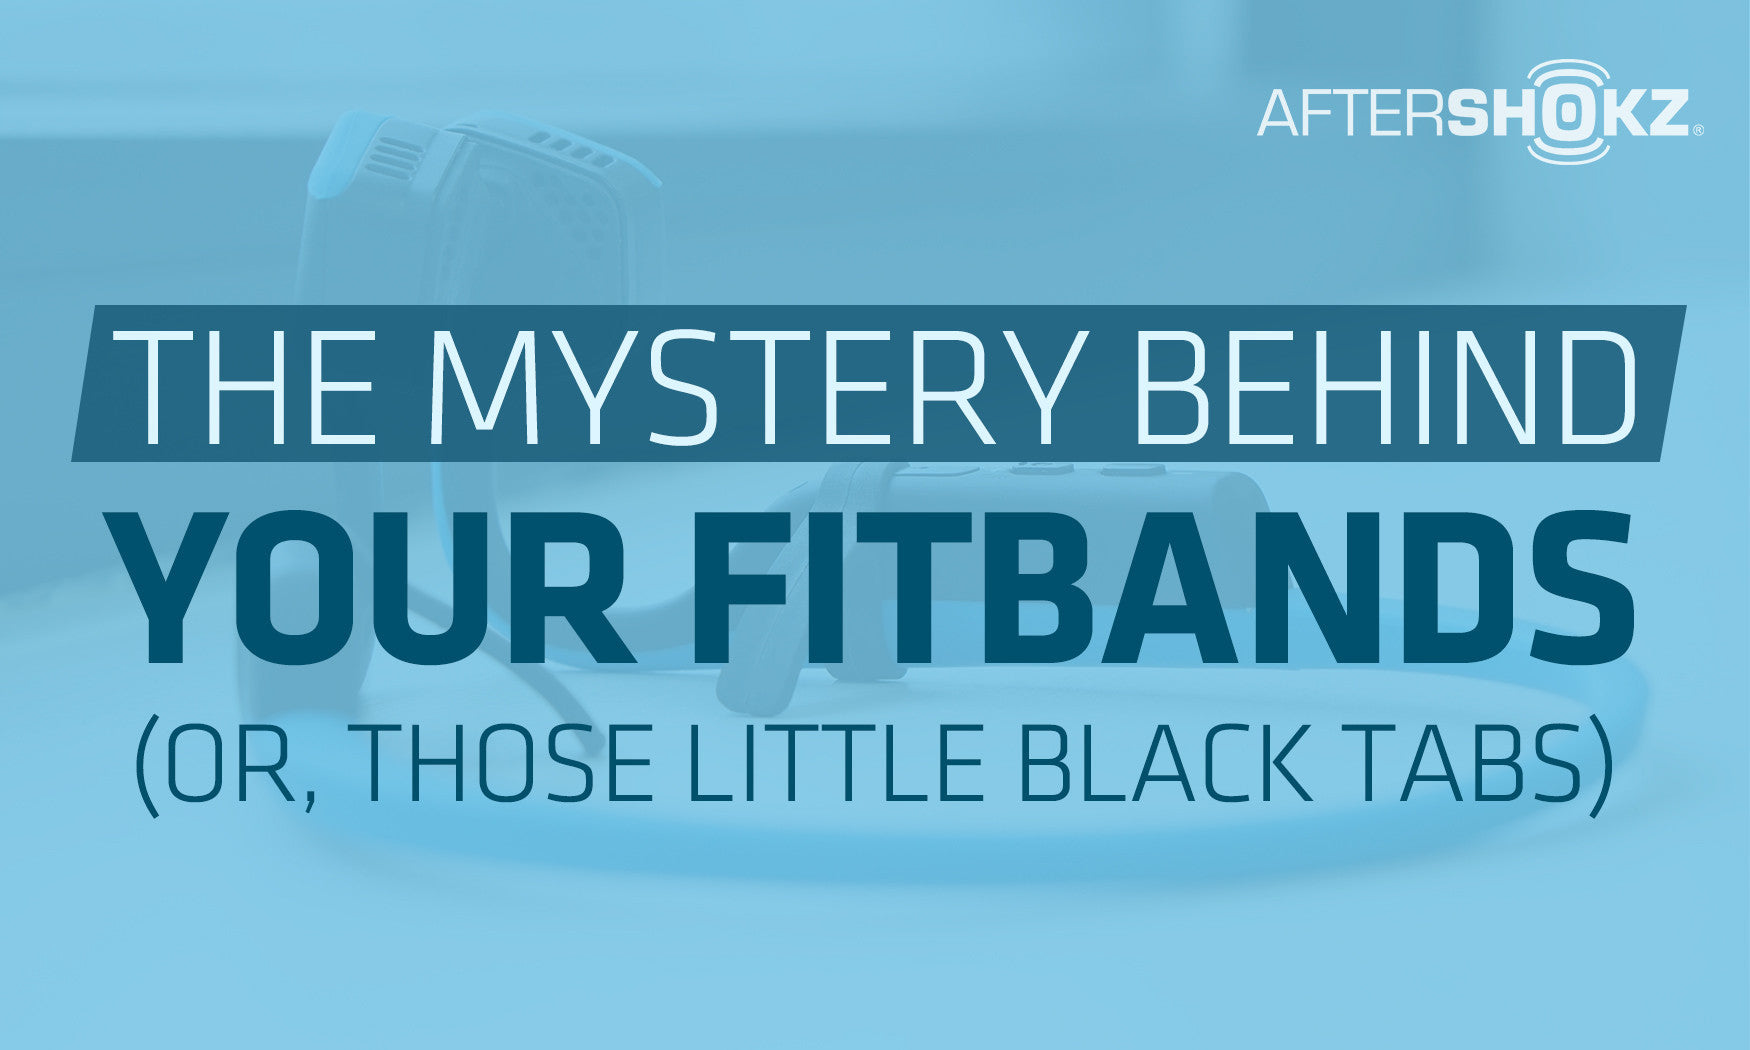 The Mystery Behind Your FitBands (Or Those Little Black Tabs)